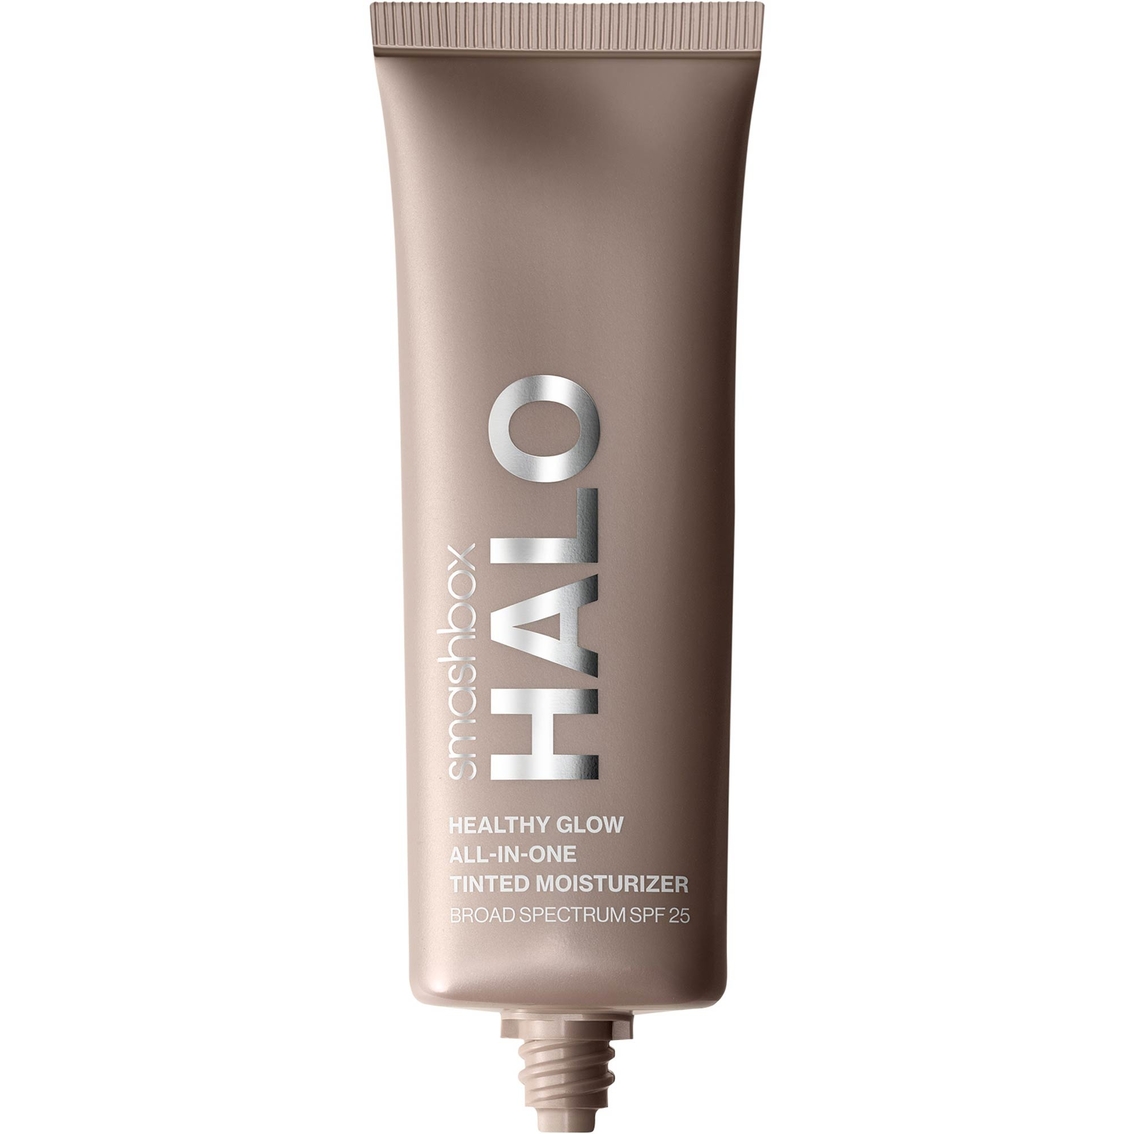 smashbox Halo Healthy Glow All-In-One Tinted Moisturizer SPF 25 - Image 3 of 10